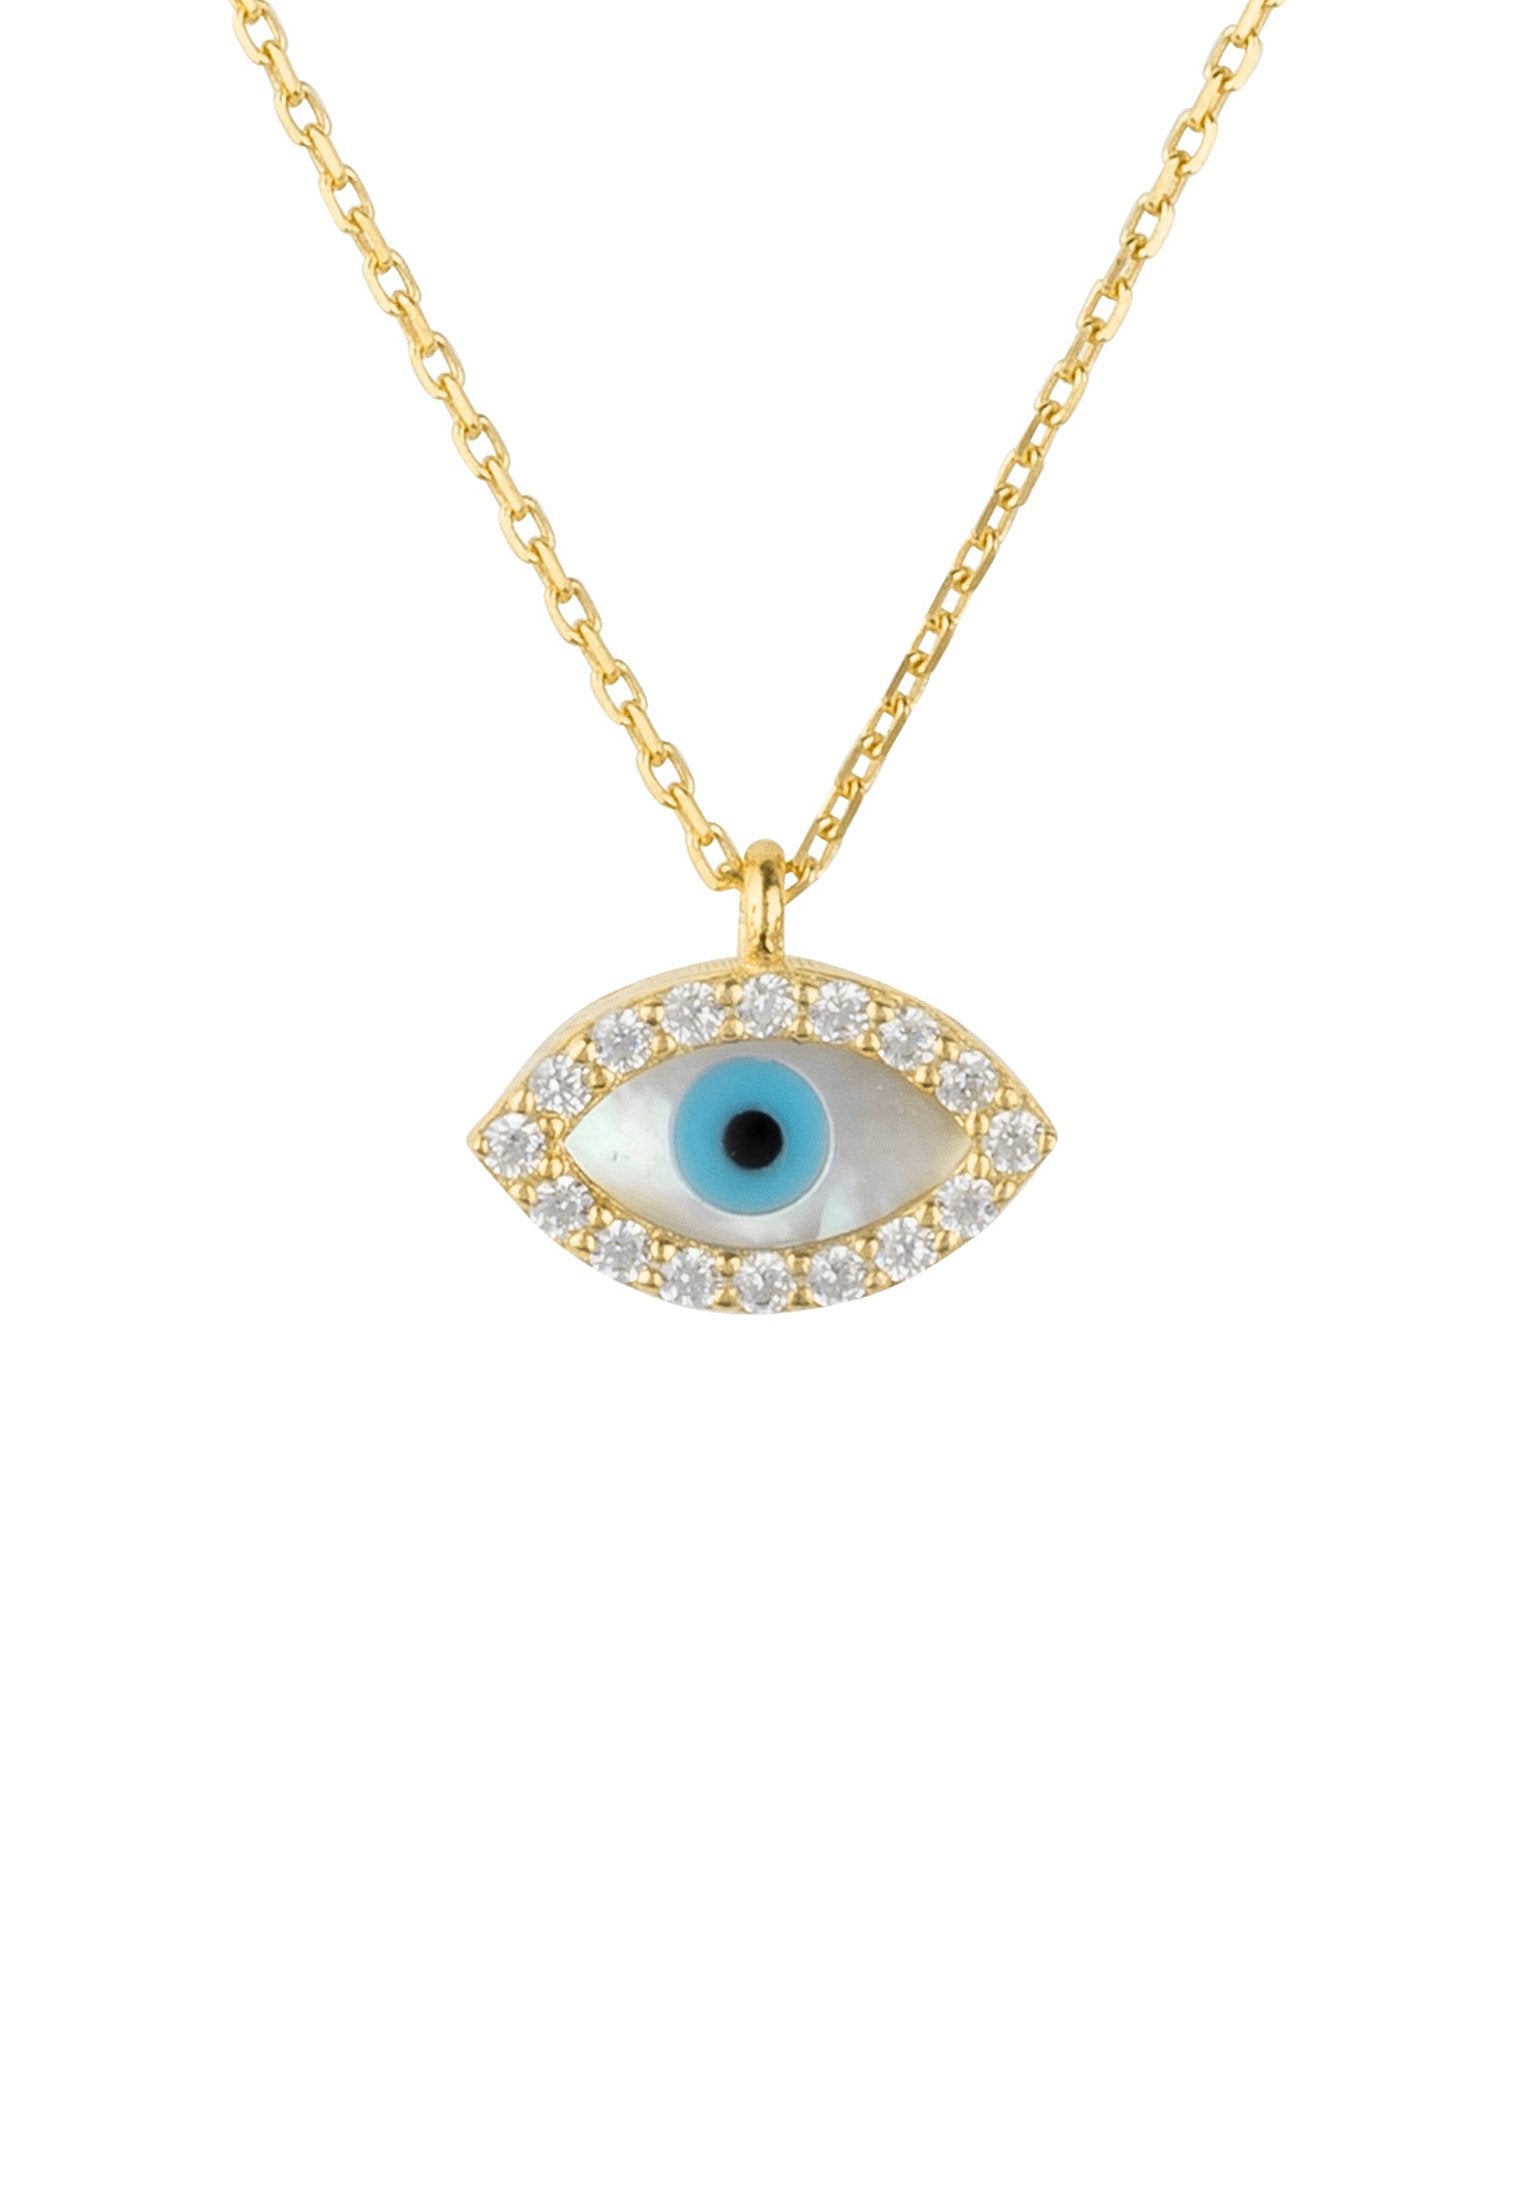 Gold Evil Eye Mother of Pearl Necklace - Petite and Delicate Sterling Silver Pendant with Zircons and Adjustable Length Bijou Her